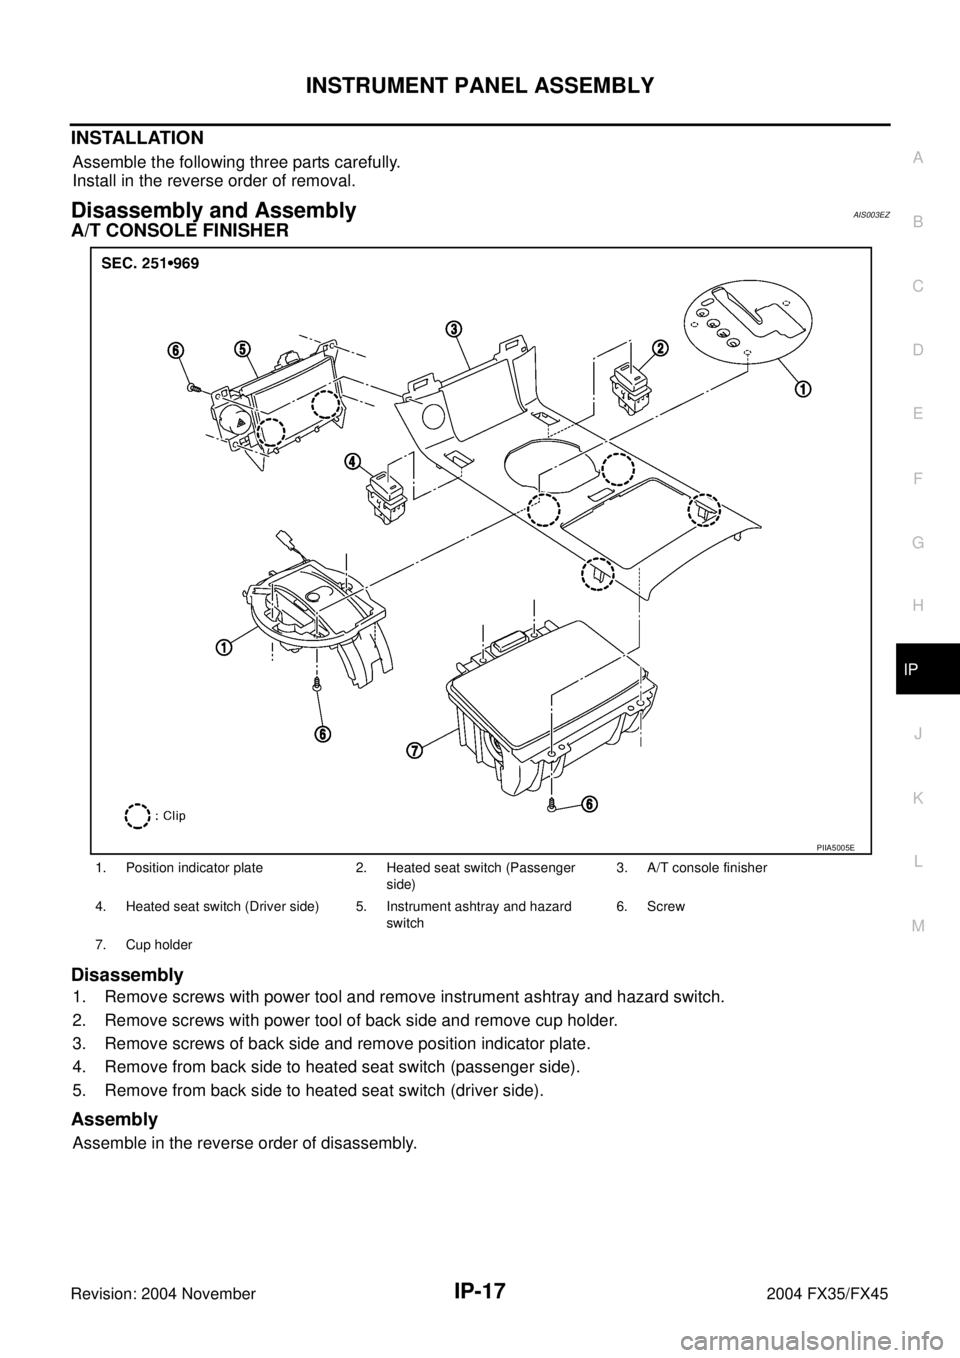 INFINITI FX35 2004  Service Manual INSTRUMENT PANEL ASSEMBLY
IP-17
C
D
E
F
G
H
J
K
L
MA
B
IP
Revision: 2004 November 2004 FX35/FX45
INSTALLATION
Assemble the following three parts carefully.
Install in the reverse order of removal.
Dis